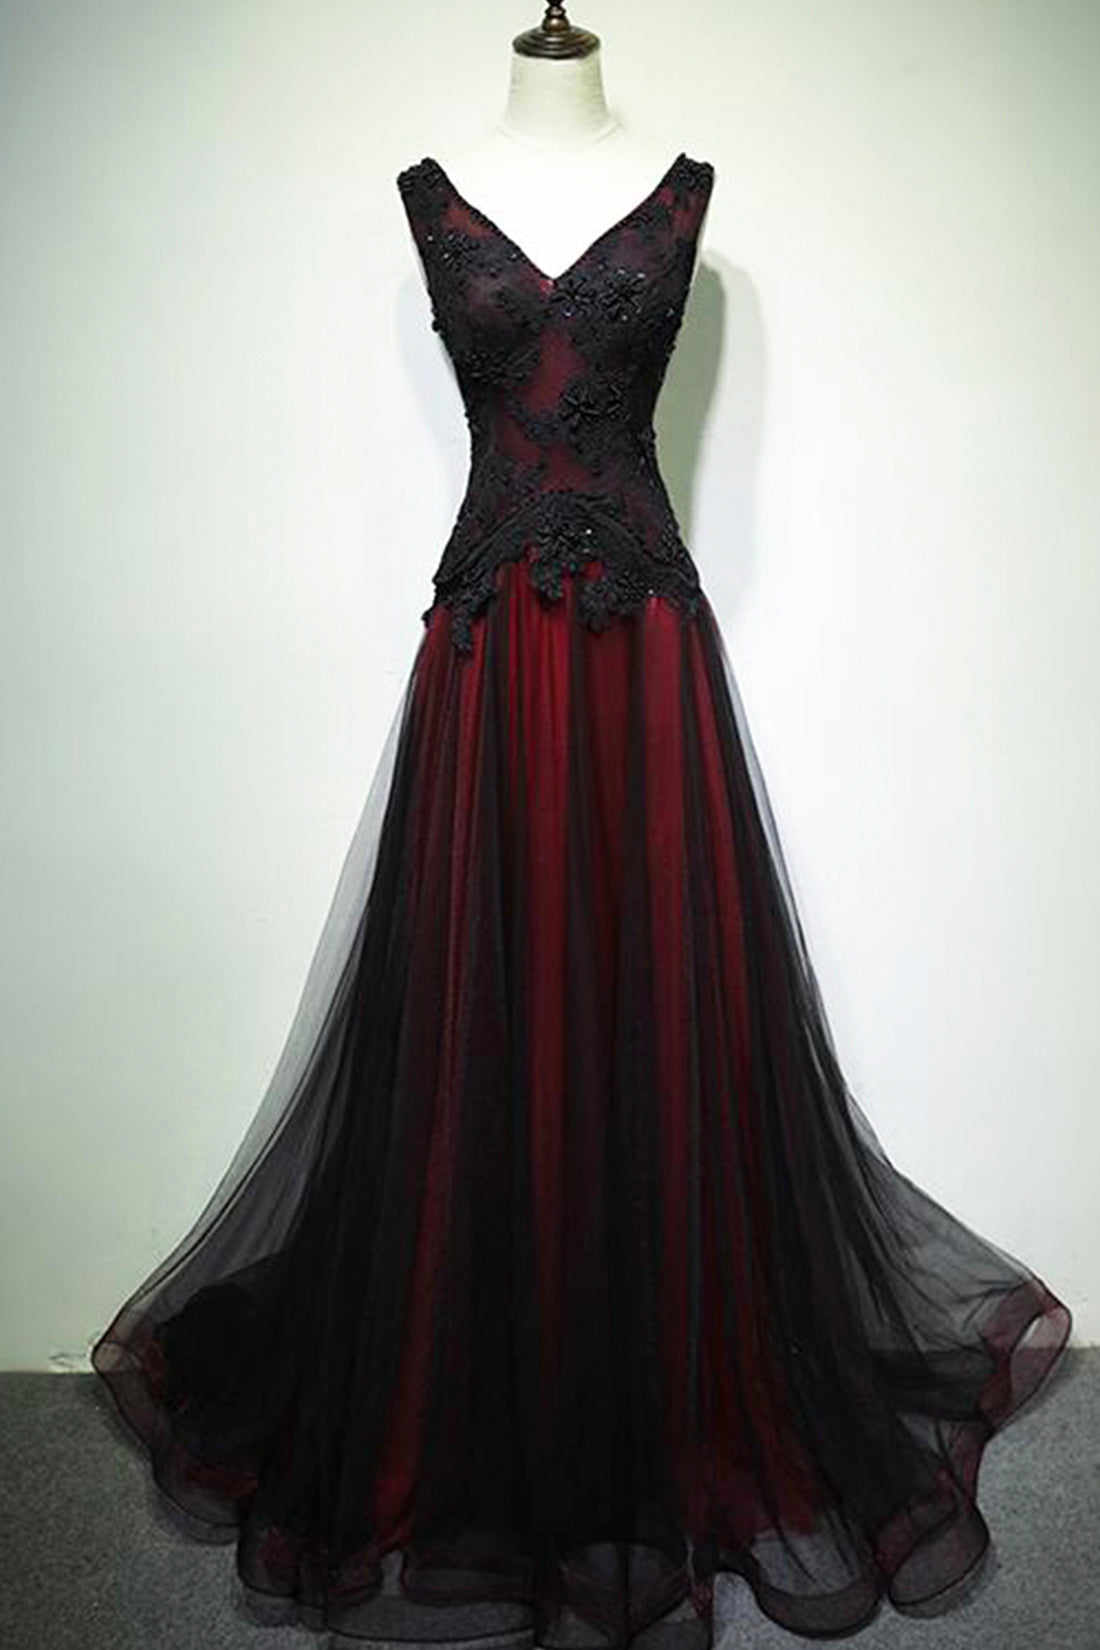 Black and Red V-Neck Tulle Long Prom Dress Outfits For Girls, Lace Evening Dress